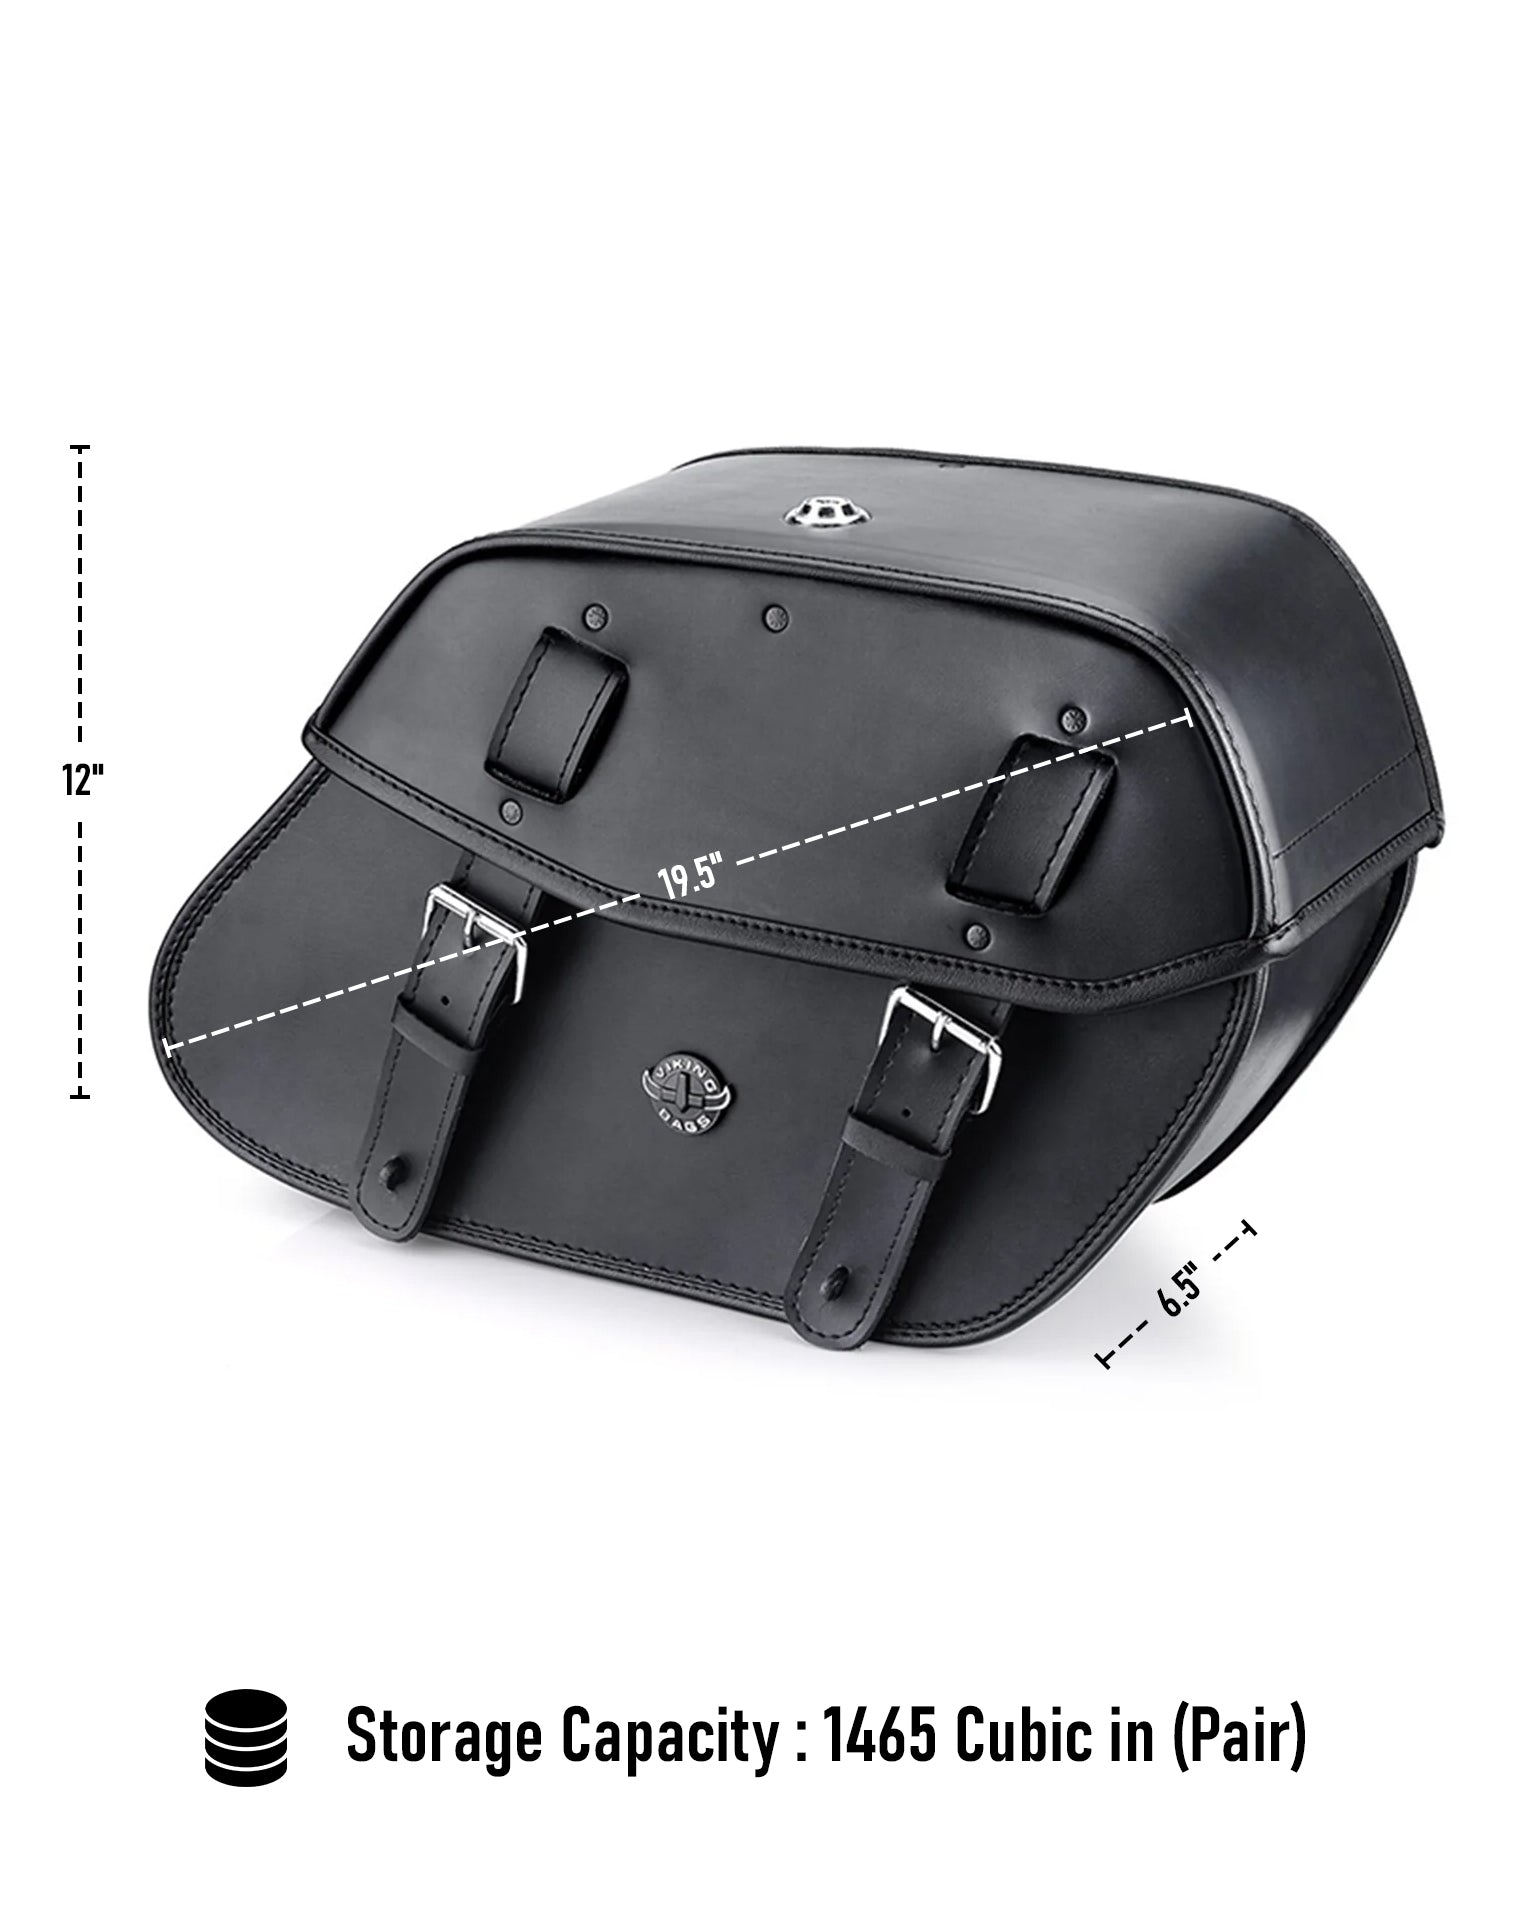 Viking Odin Large Victory High Ball Leather Motorcycle Saddlebags Can Store Your Ridings Gears